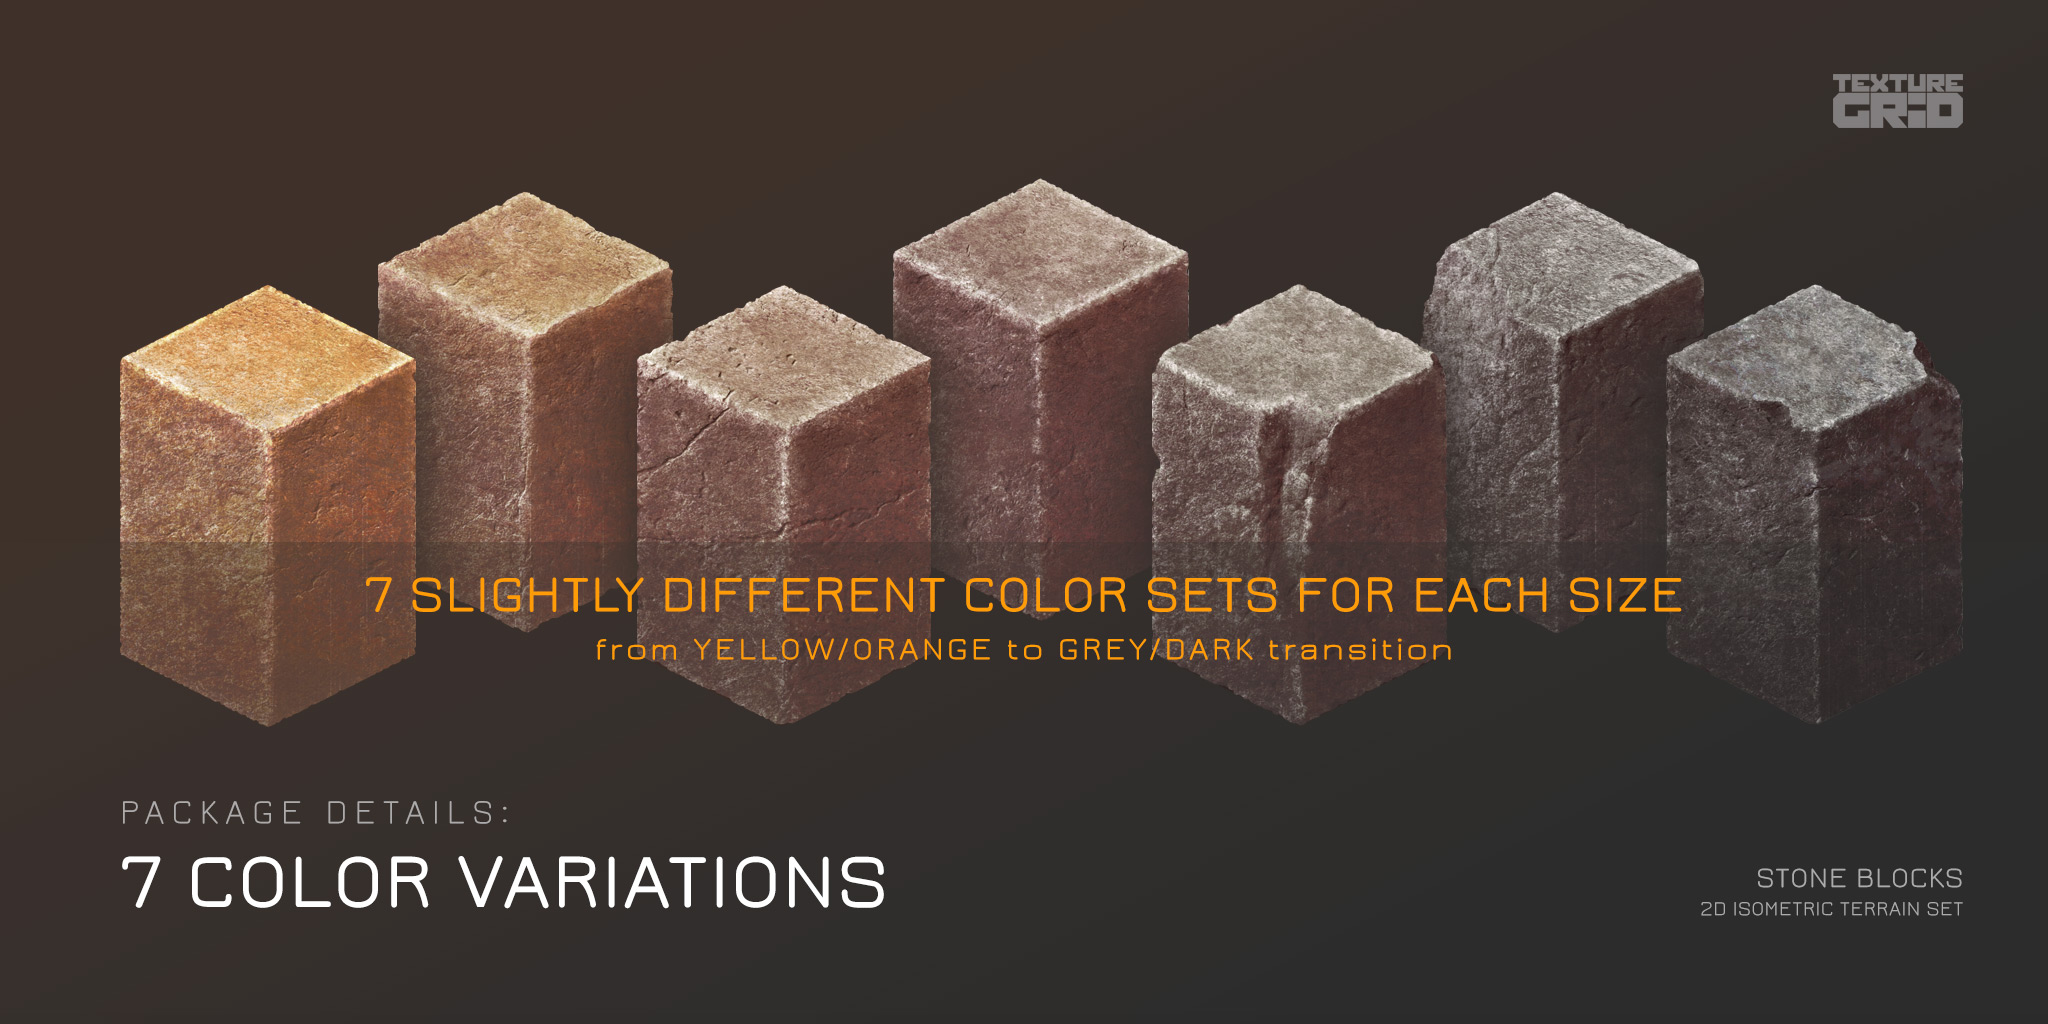 Stone Blocks tilesets in 7 slightly different color variations